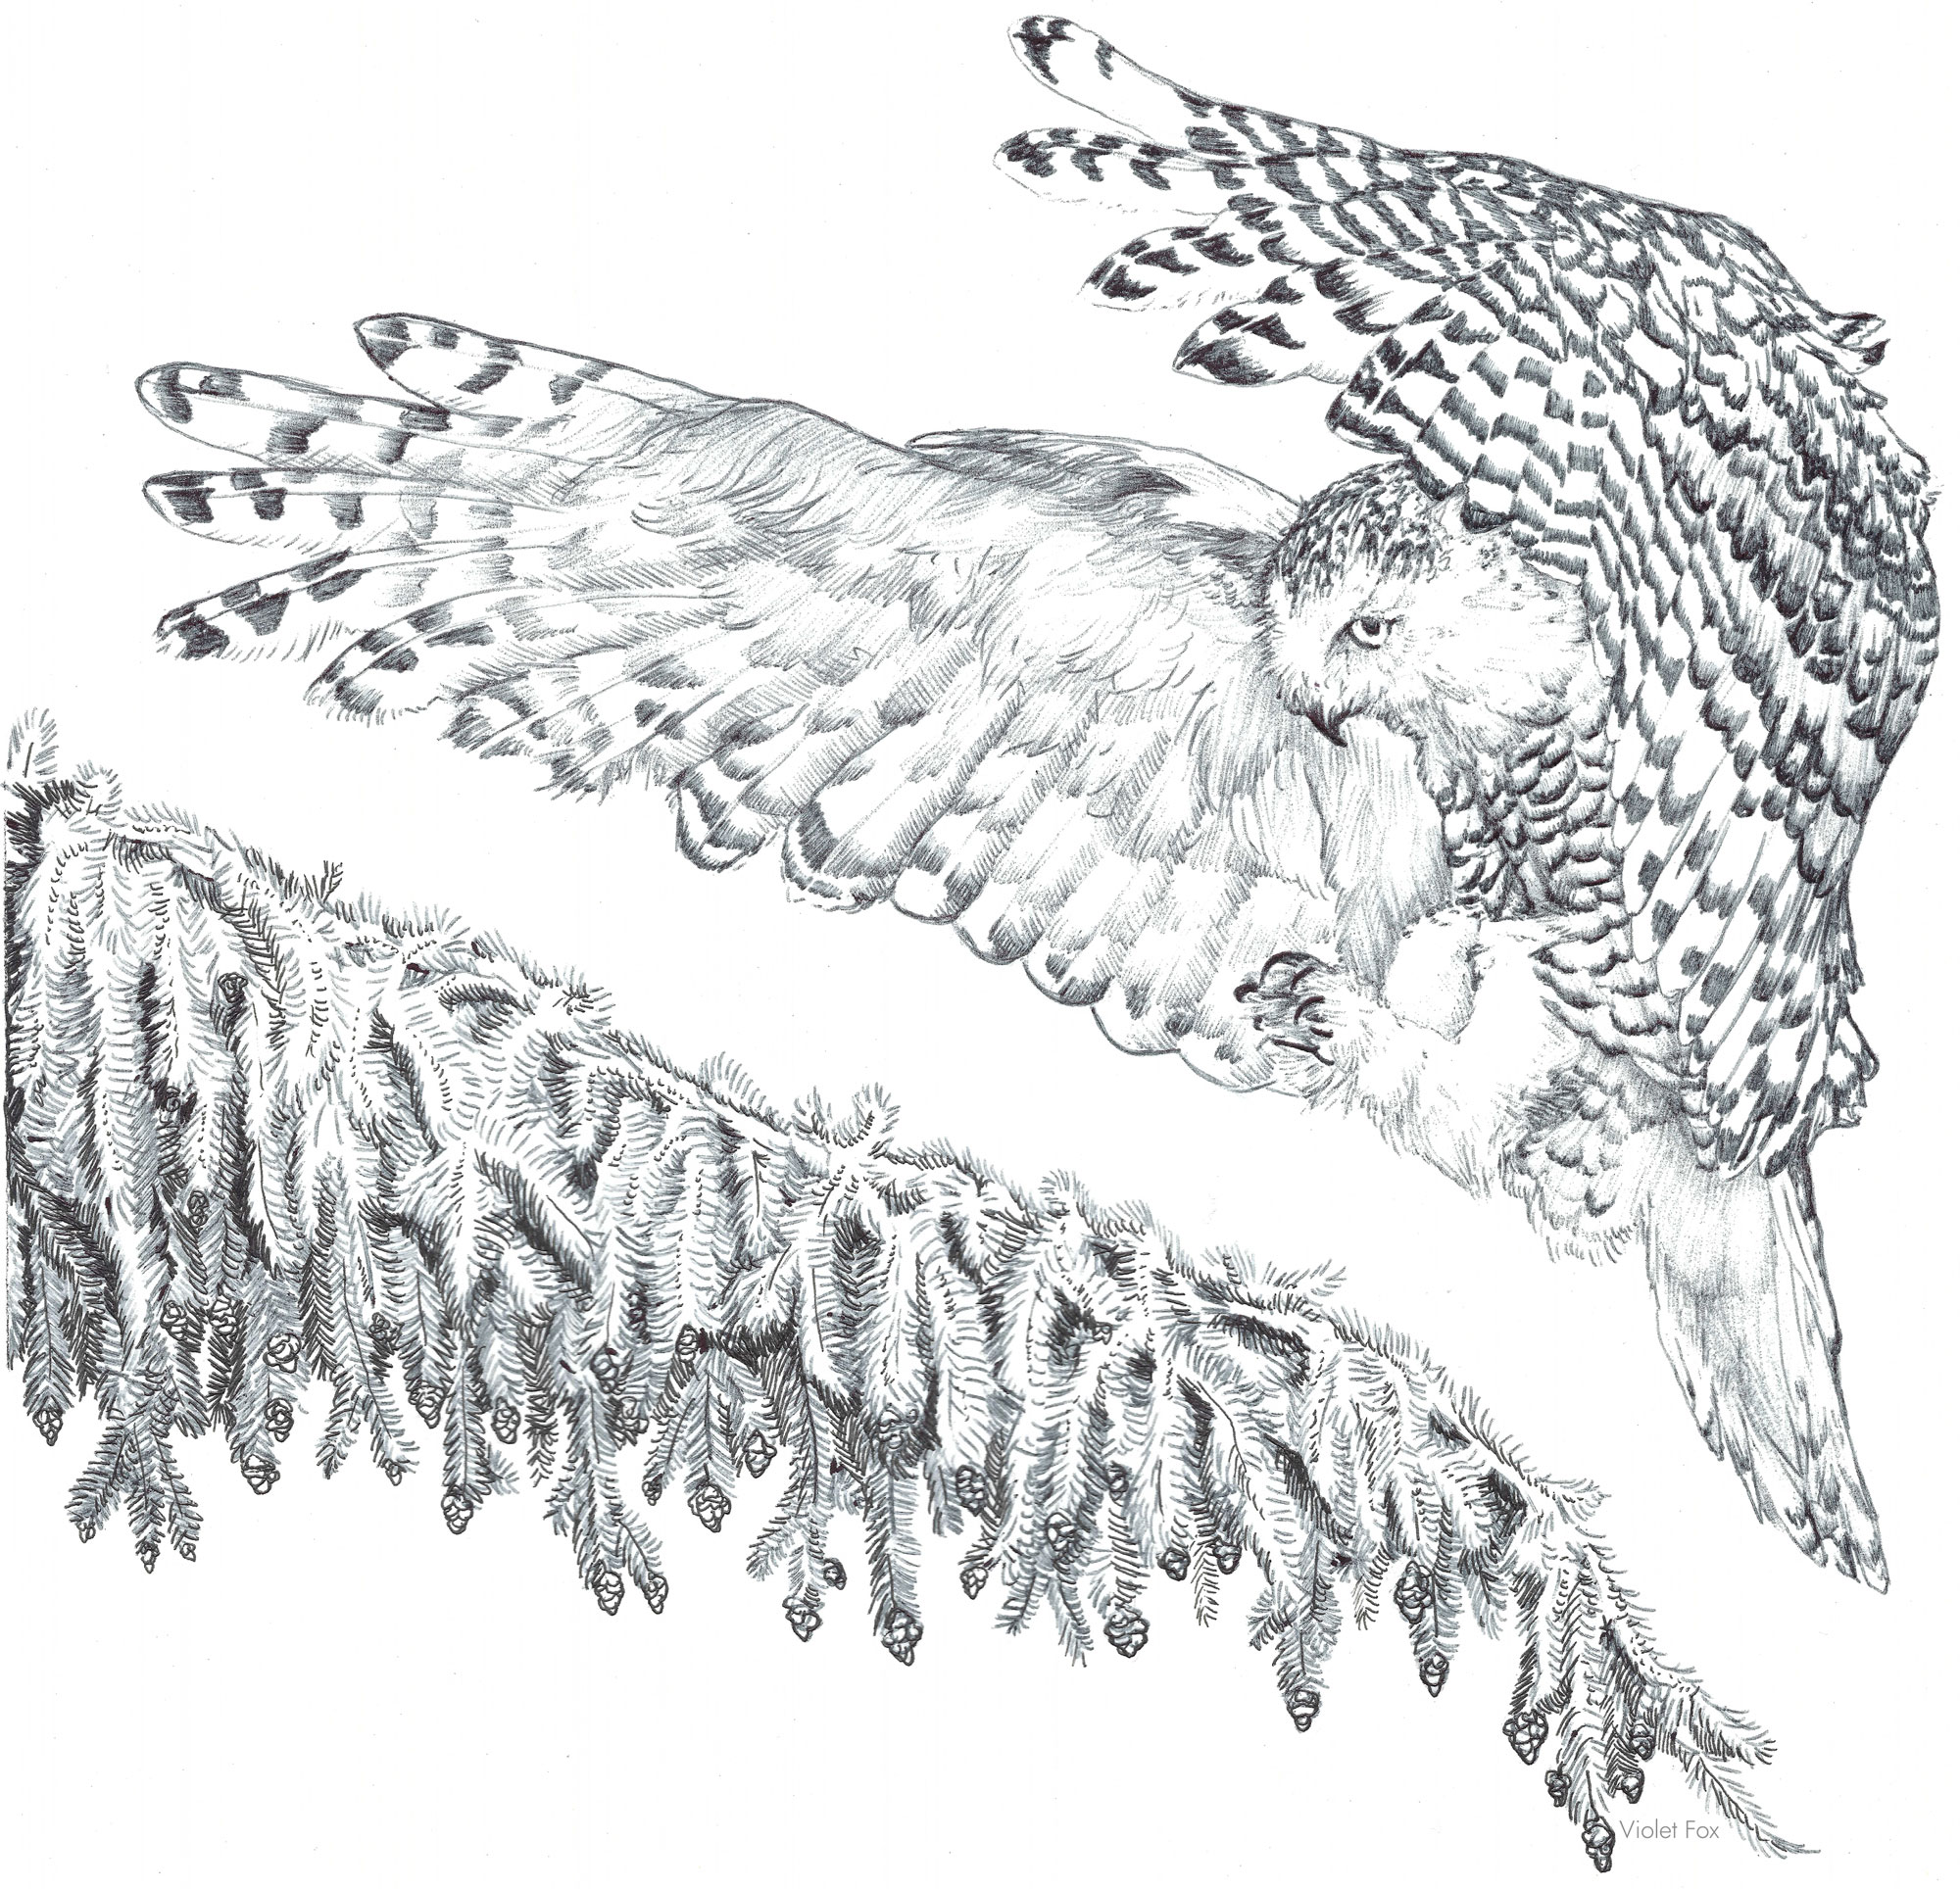 Drawing of a snowy owl about to land on a branch